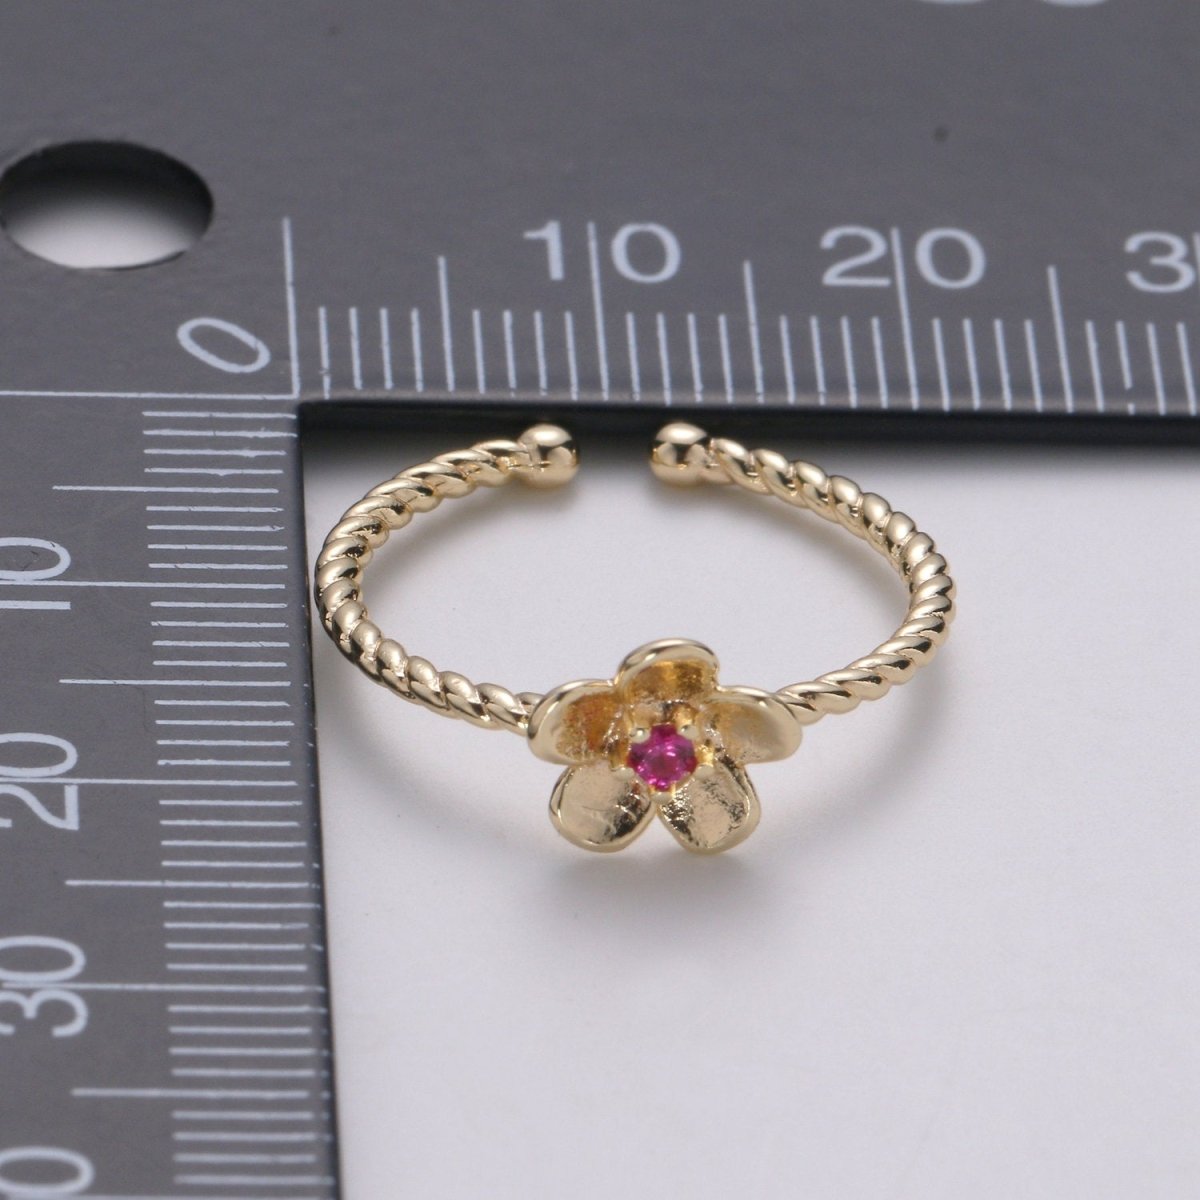 Dainty Daisy ring, Gold Mini Floral Ring, Dainty Stackable Rings, Open Adjustable Ring Crystal Daisy Flower Twisted Ring Minimalist Jewelry R-116 - DLUXCA